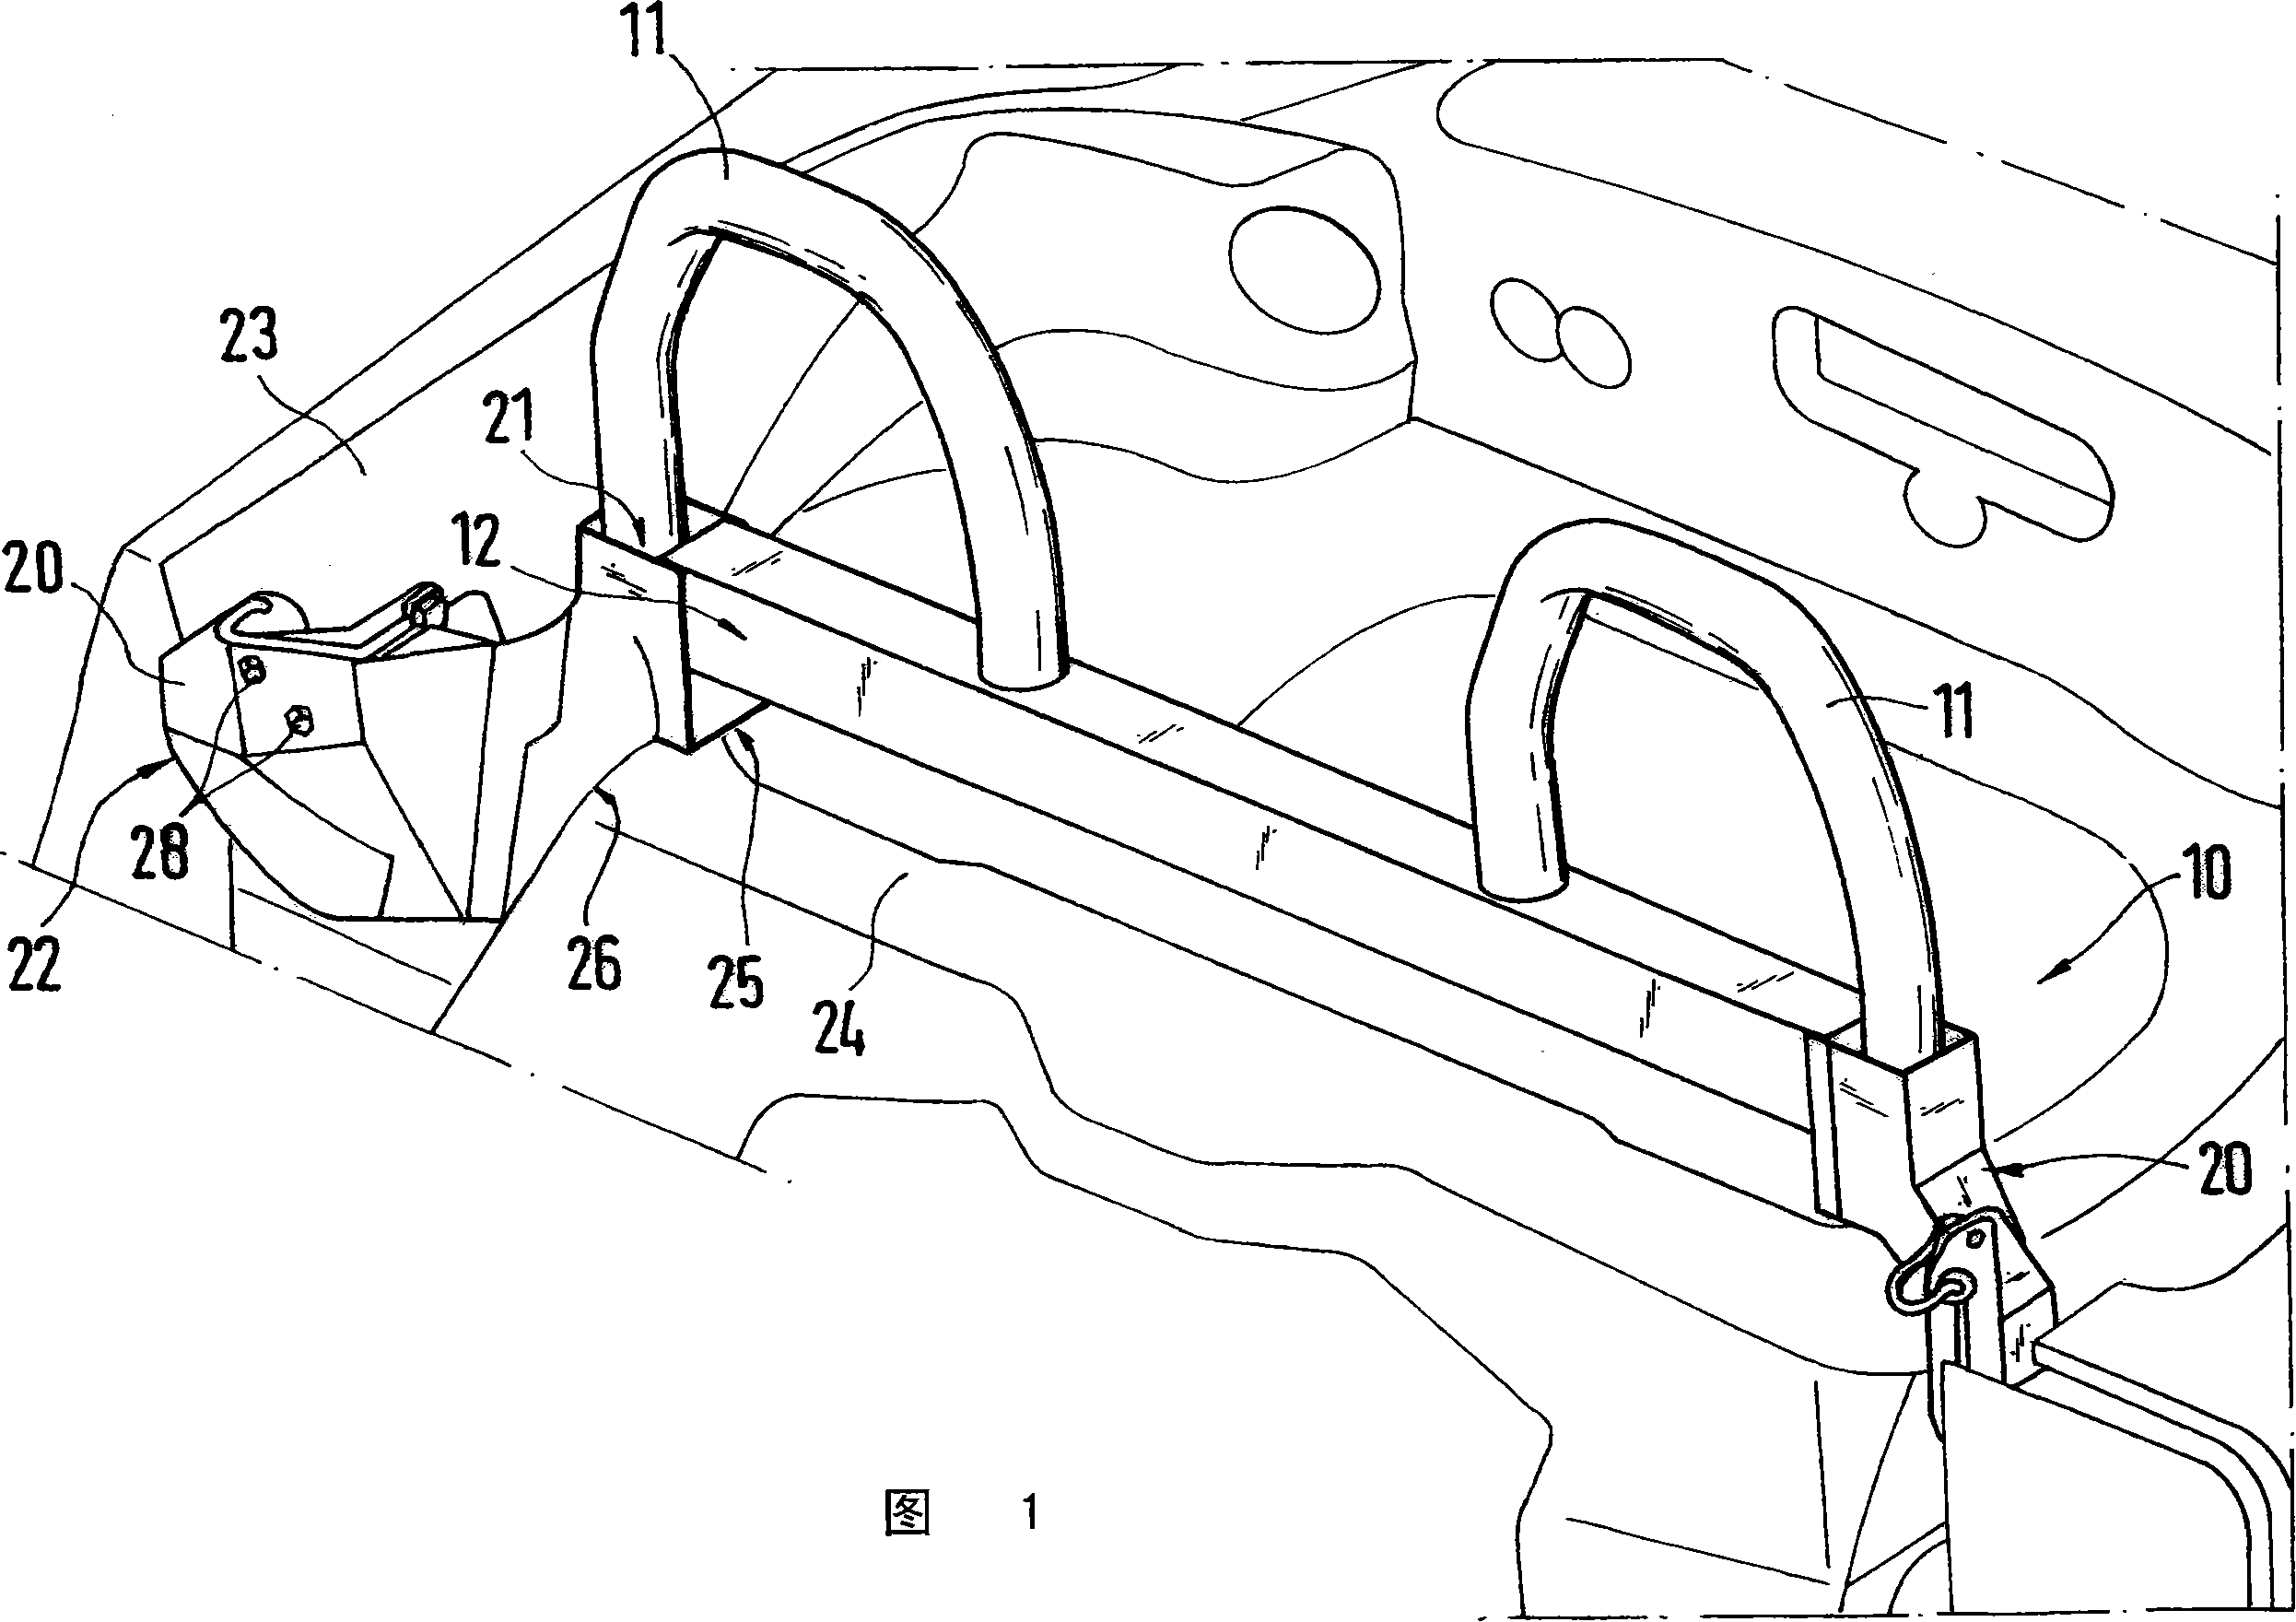 Motor vehicle with a roll-over bar assembly